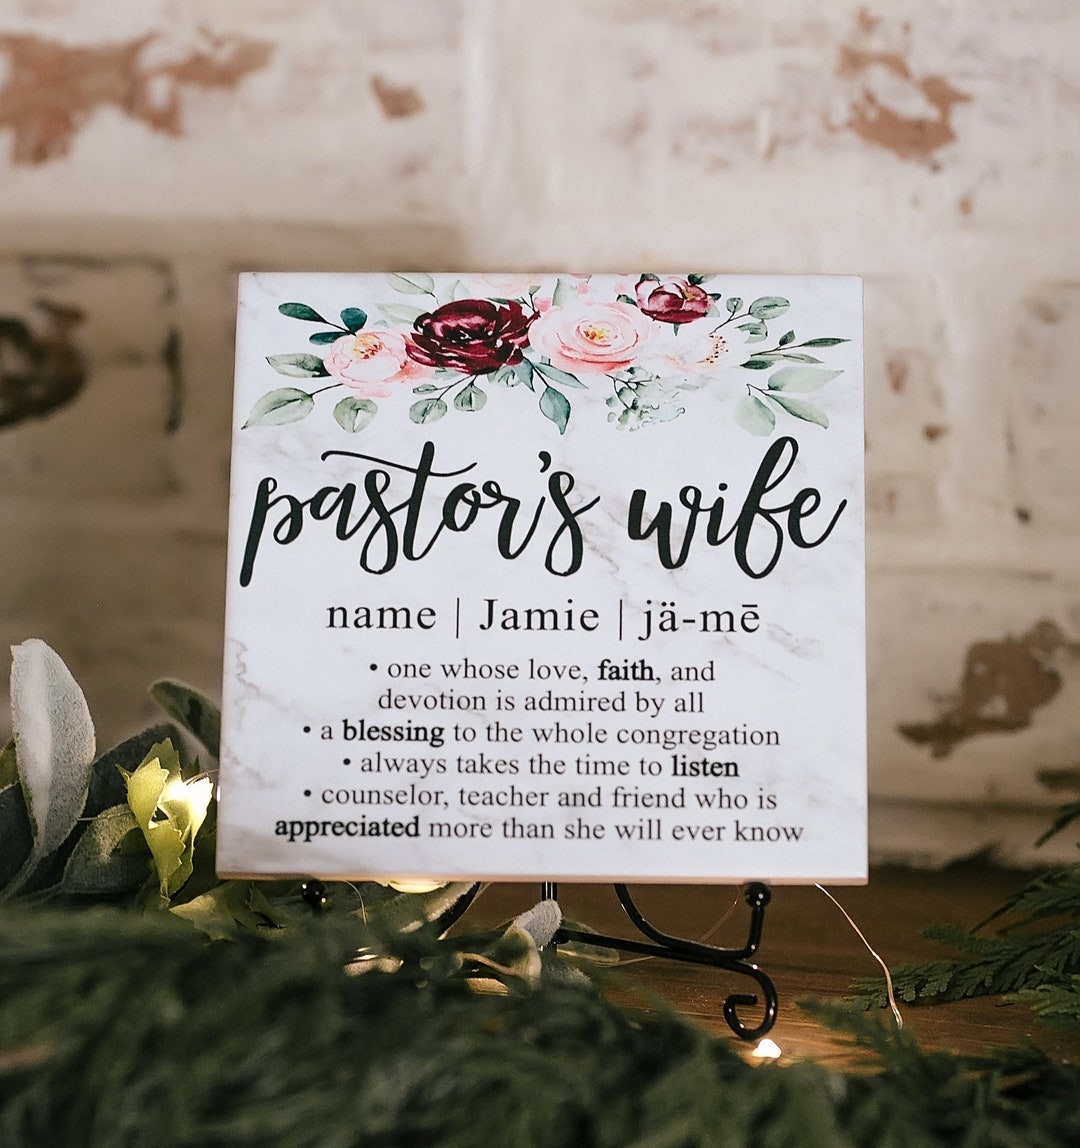 Pastors Wife Appreciation Day Tile Plaque Gift and Stand